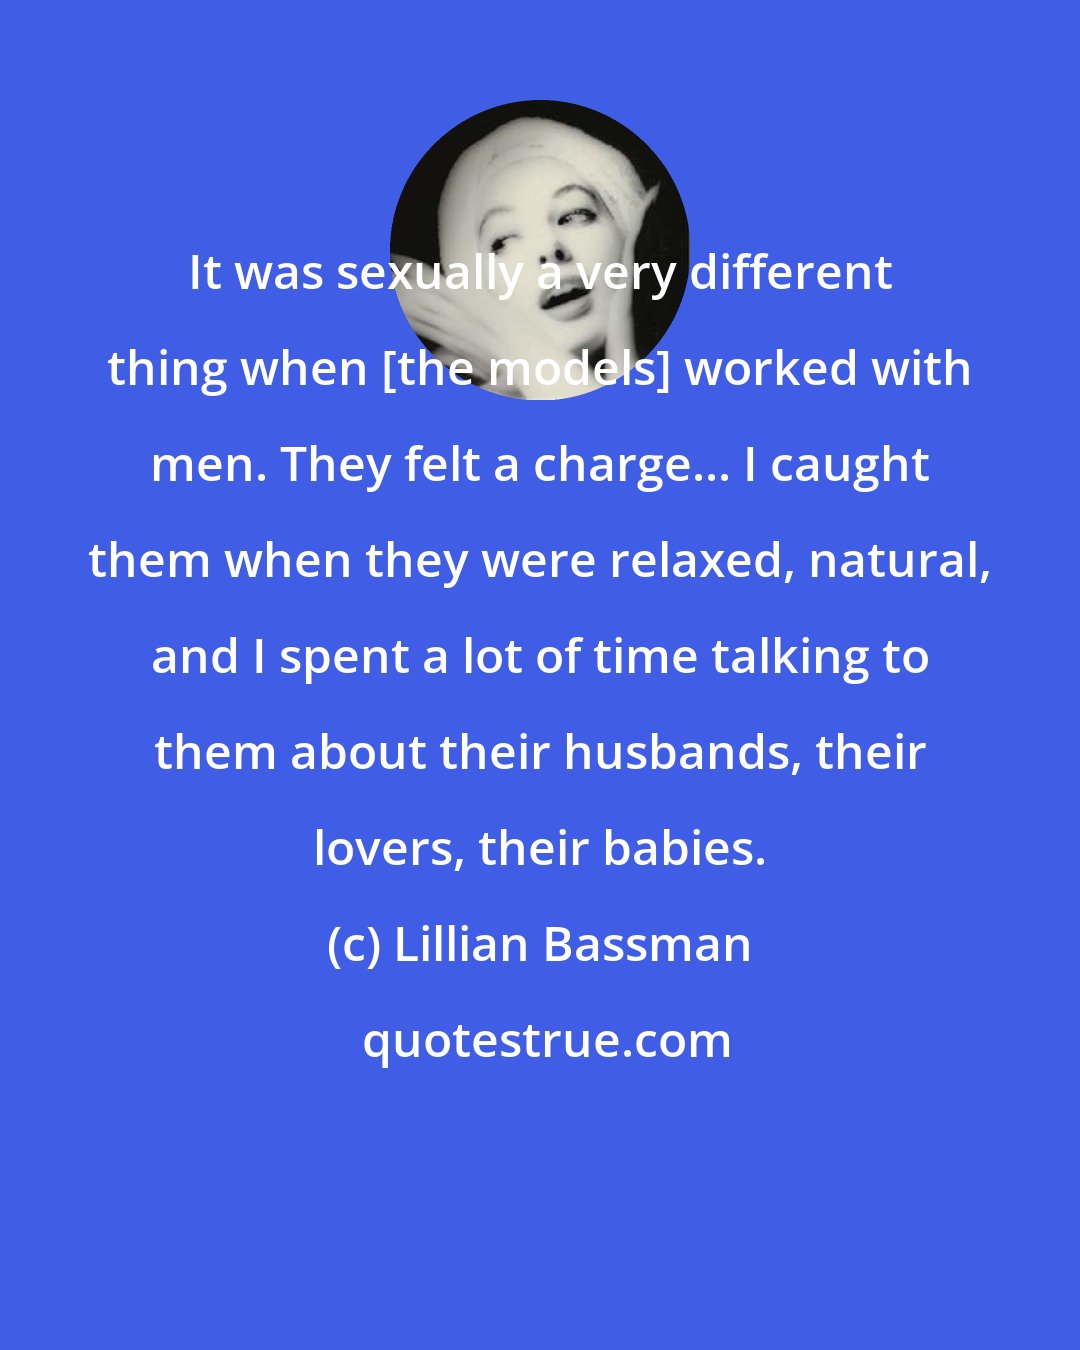 Lillian Bassman: It was sexually a very different thing when [the models] worked with men. They felt a charge... I caught them when they were relaxed, natural, and I spent a lot of time talking to them about their husbands, their lovers, their babies.